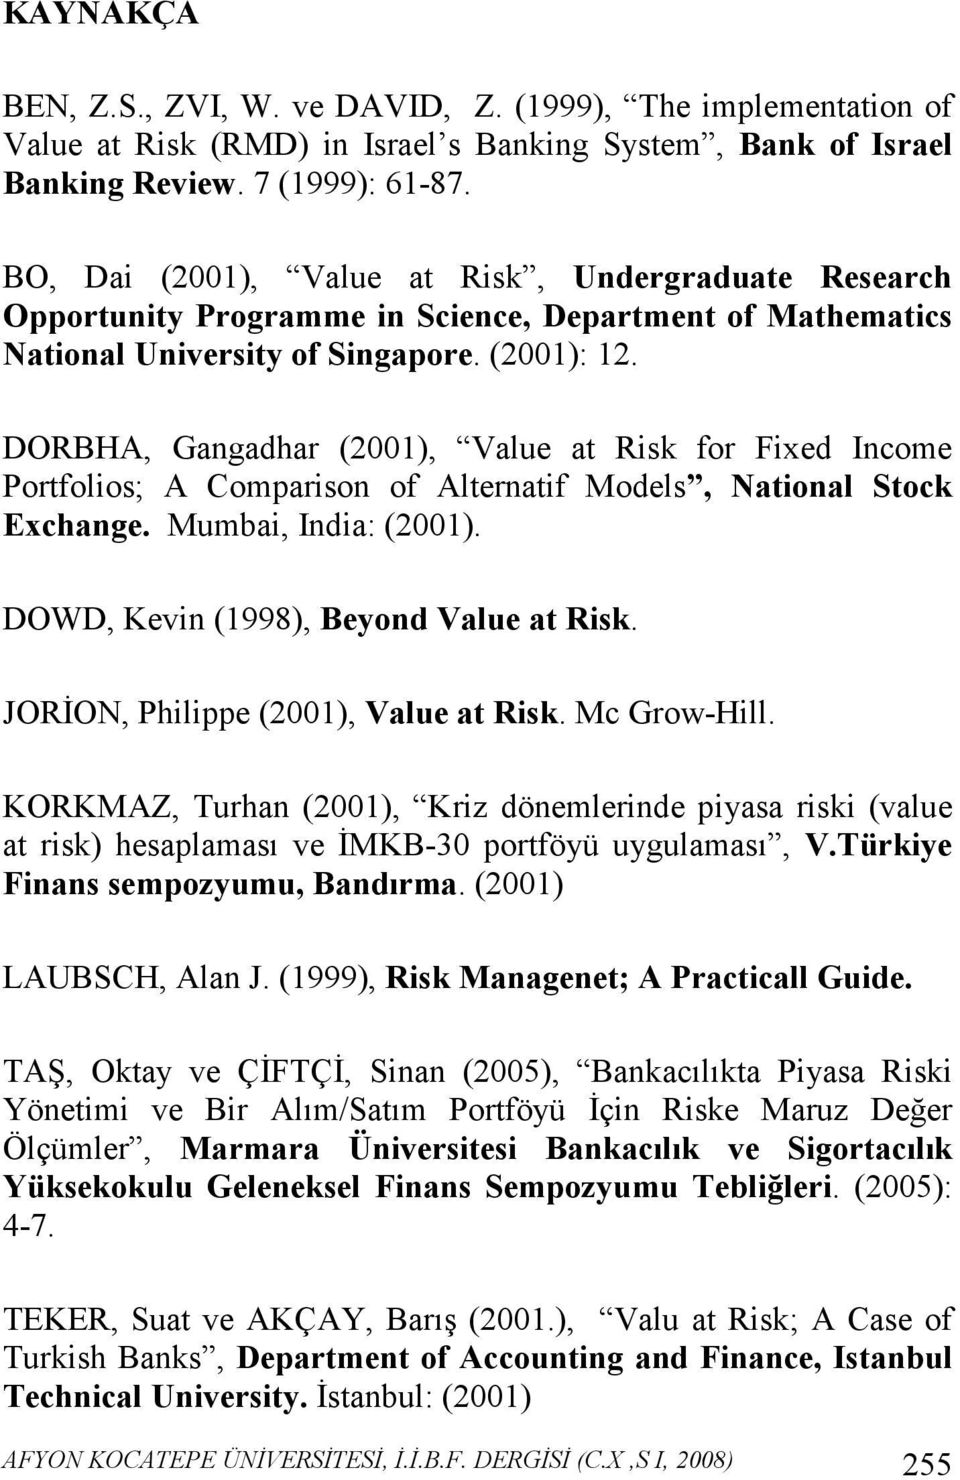 DORBHA, Gangadhar (2001), Value at Risk for Fixed Income Portfolios; A Comparison of Alternatif Models, National Stock Exchange. Mumbai, India: (2001). DOWD, Kevin (1998), Beyond Value at Risk.